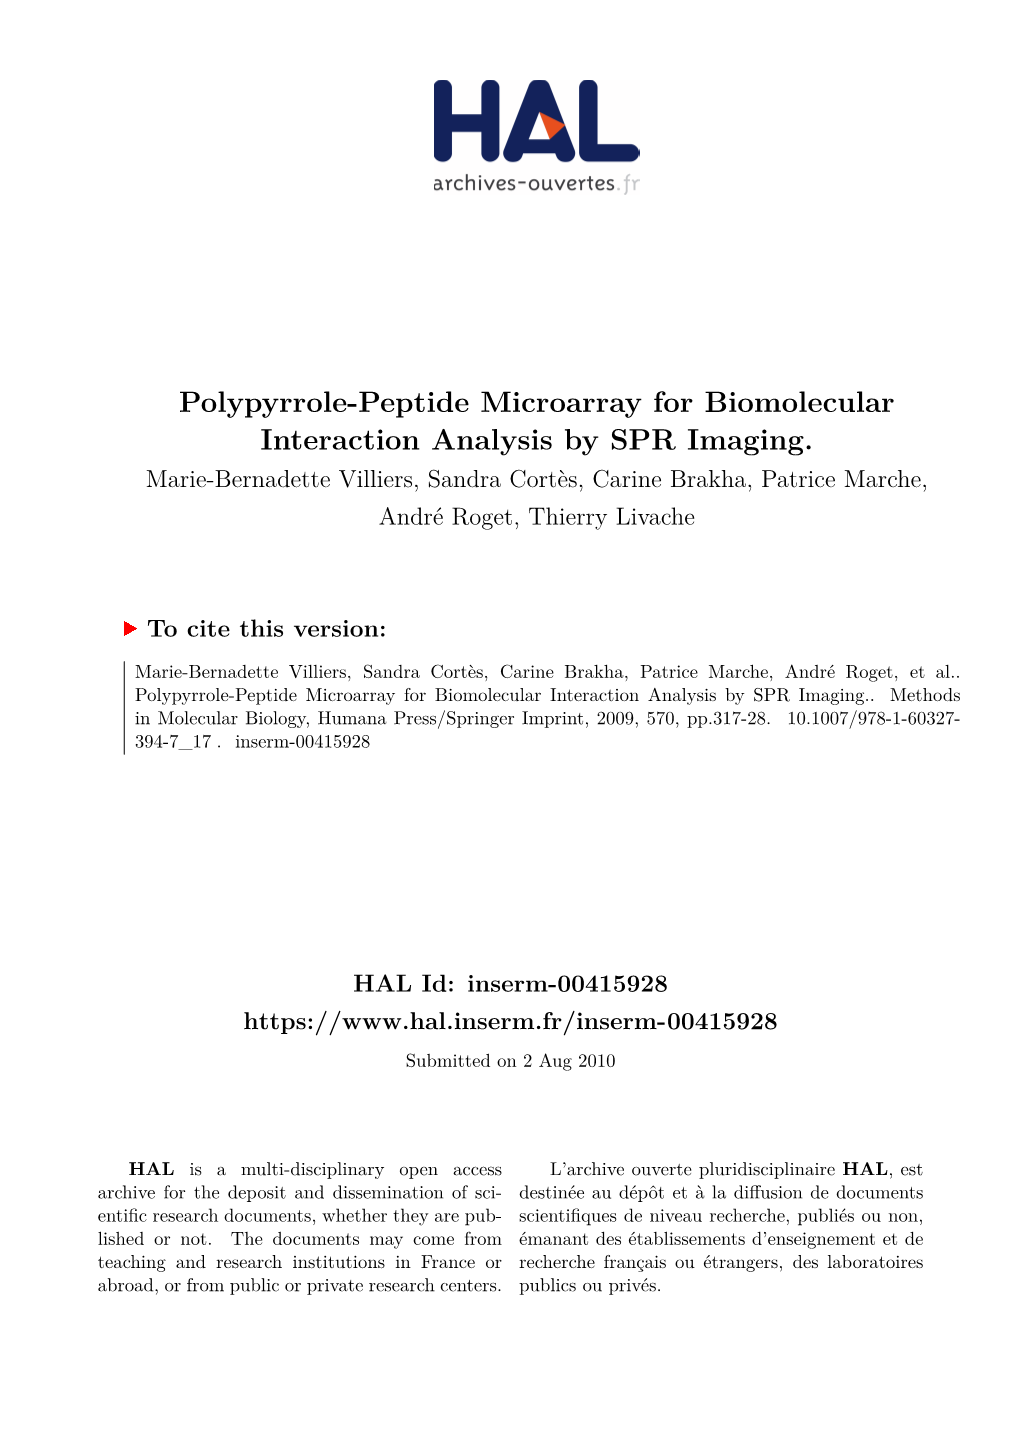 Polypyrrole-Peptide Microarray for Biomolecular Interaction Analysis by SPR Imaging